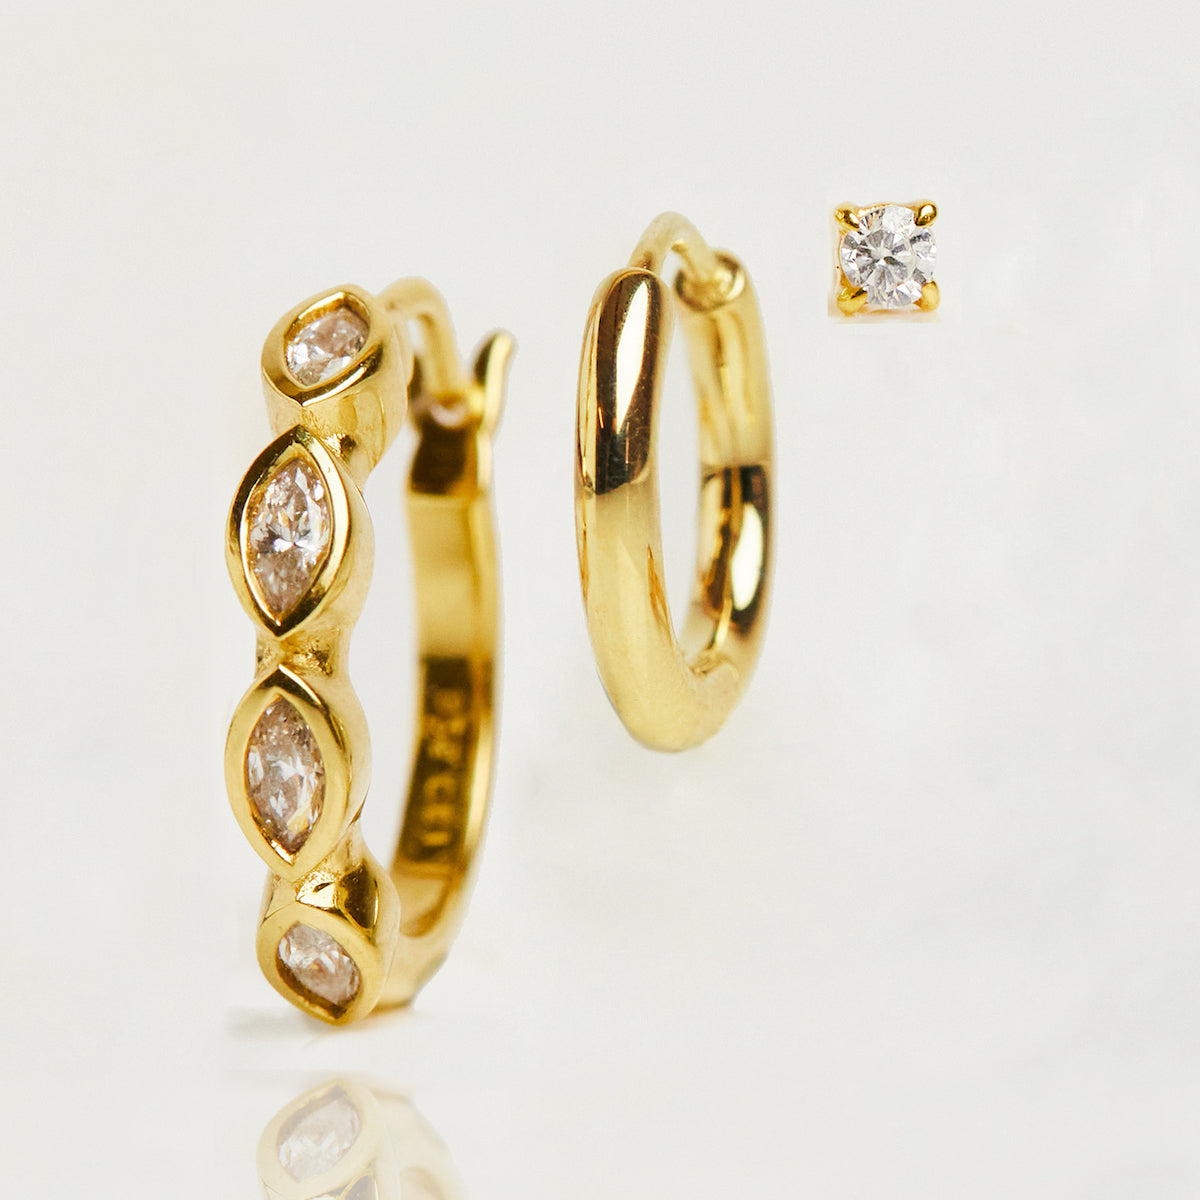 Carrie elizabeth earring stacking set in cz and gold vermeil